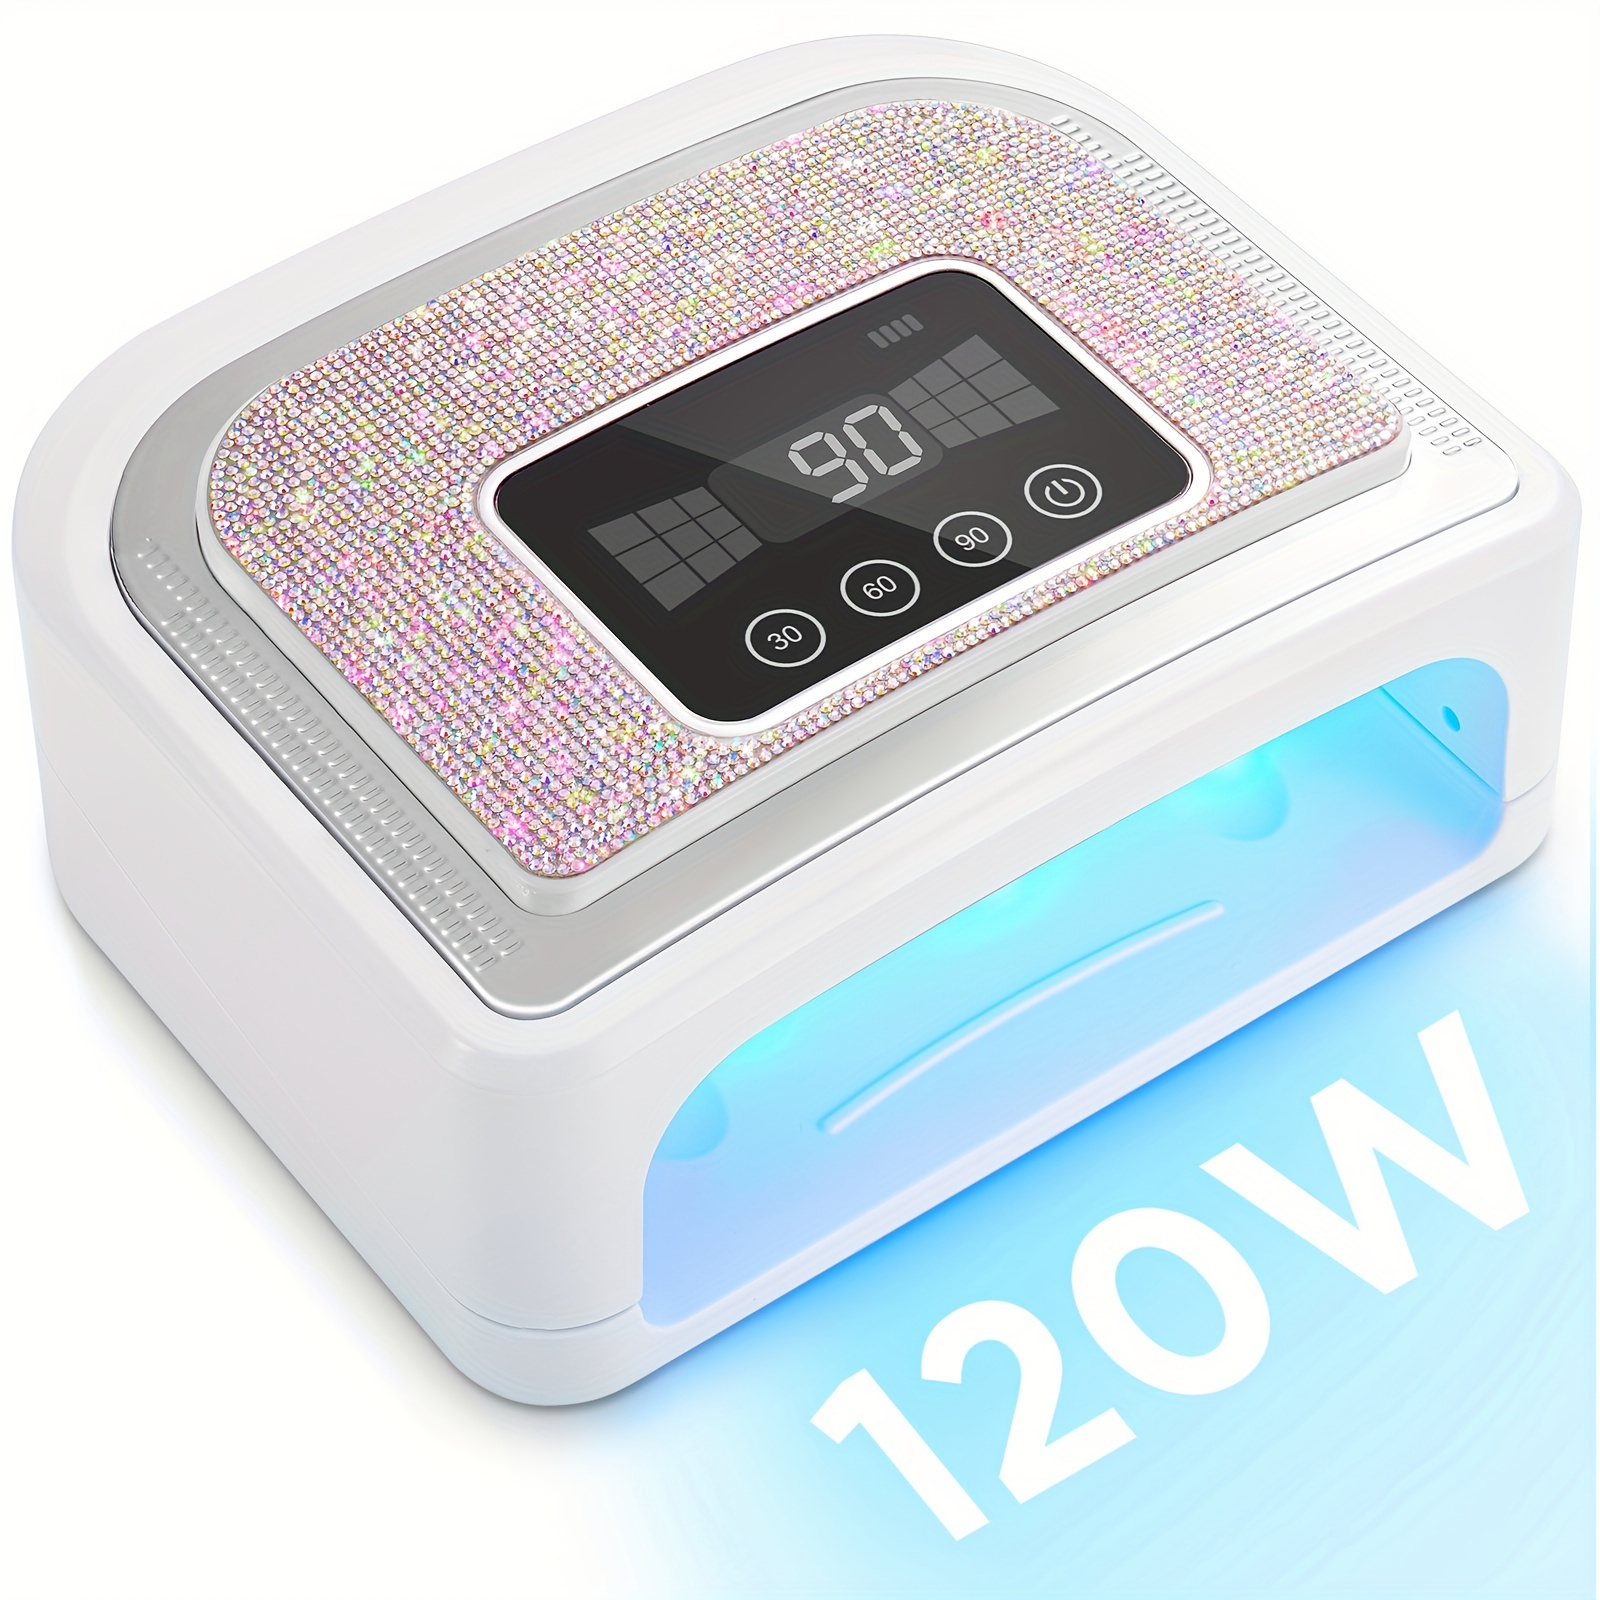 

Rechargeable Uv Nail Lamp For Gel Nails, Led Nail Lamp With 4 Timer Modes